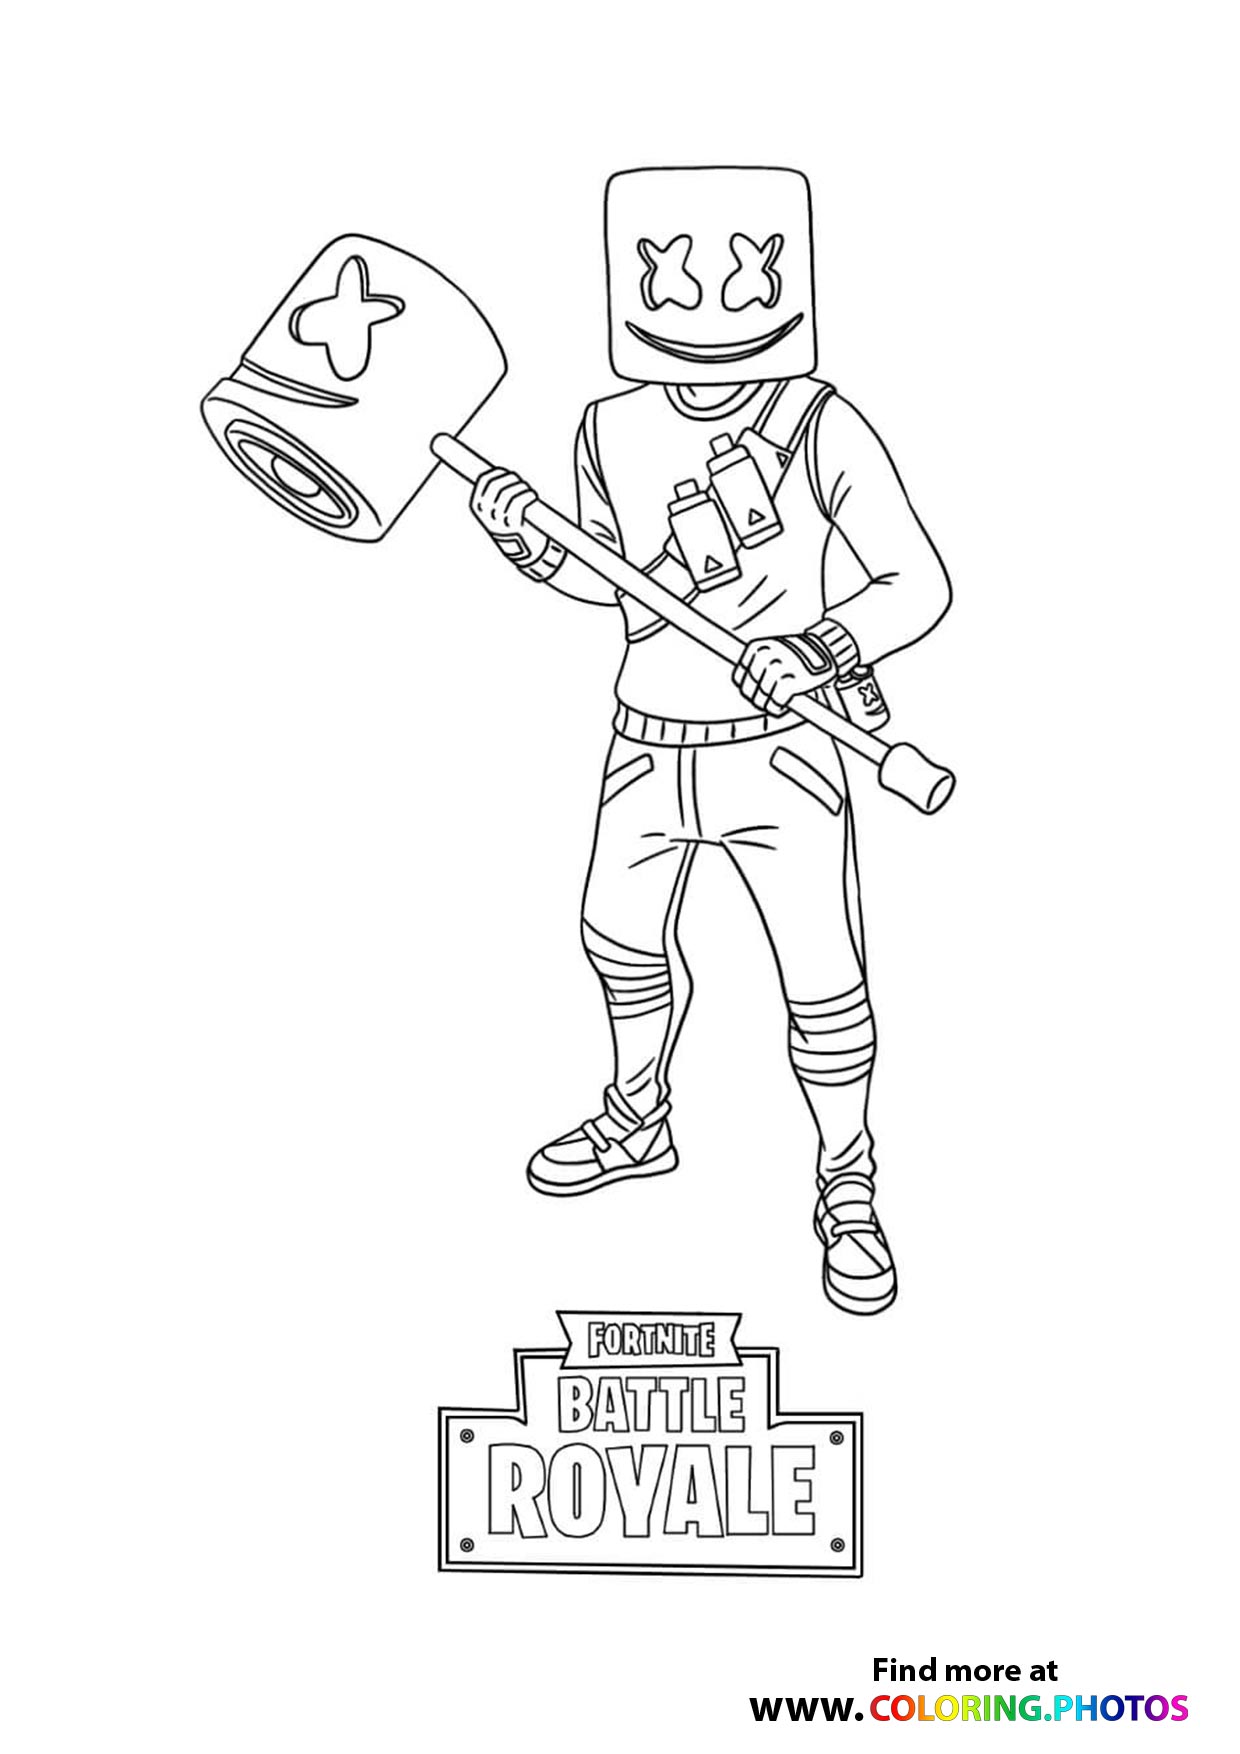 Fortnite Awesome Marshmello   Coloring Pages for kids